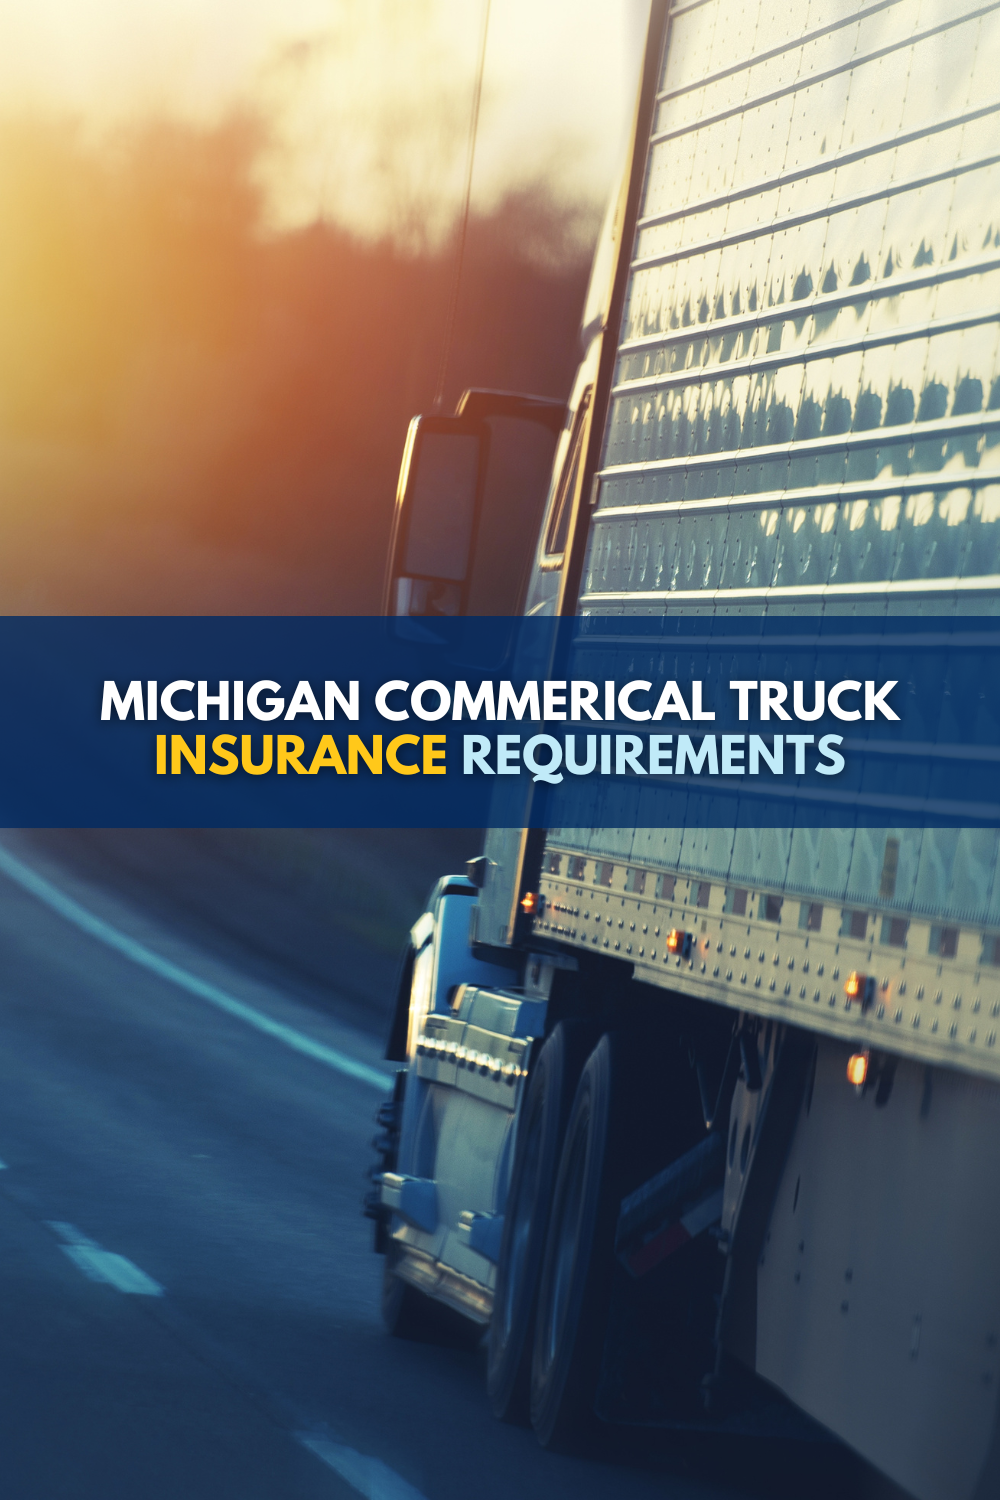 Michigan Commercial Truck Insurance Requirements: What You Need to Know